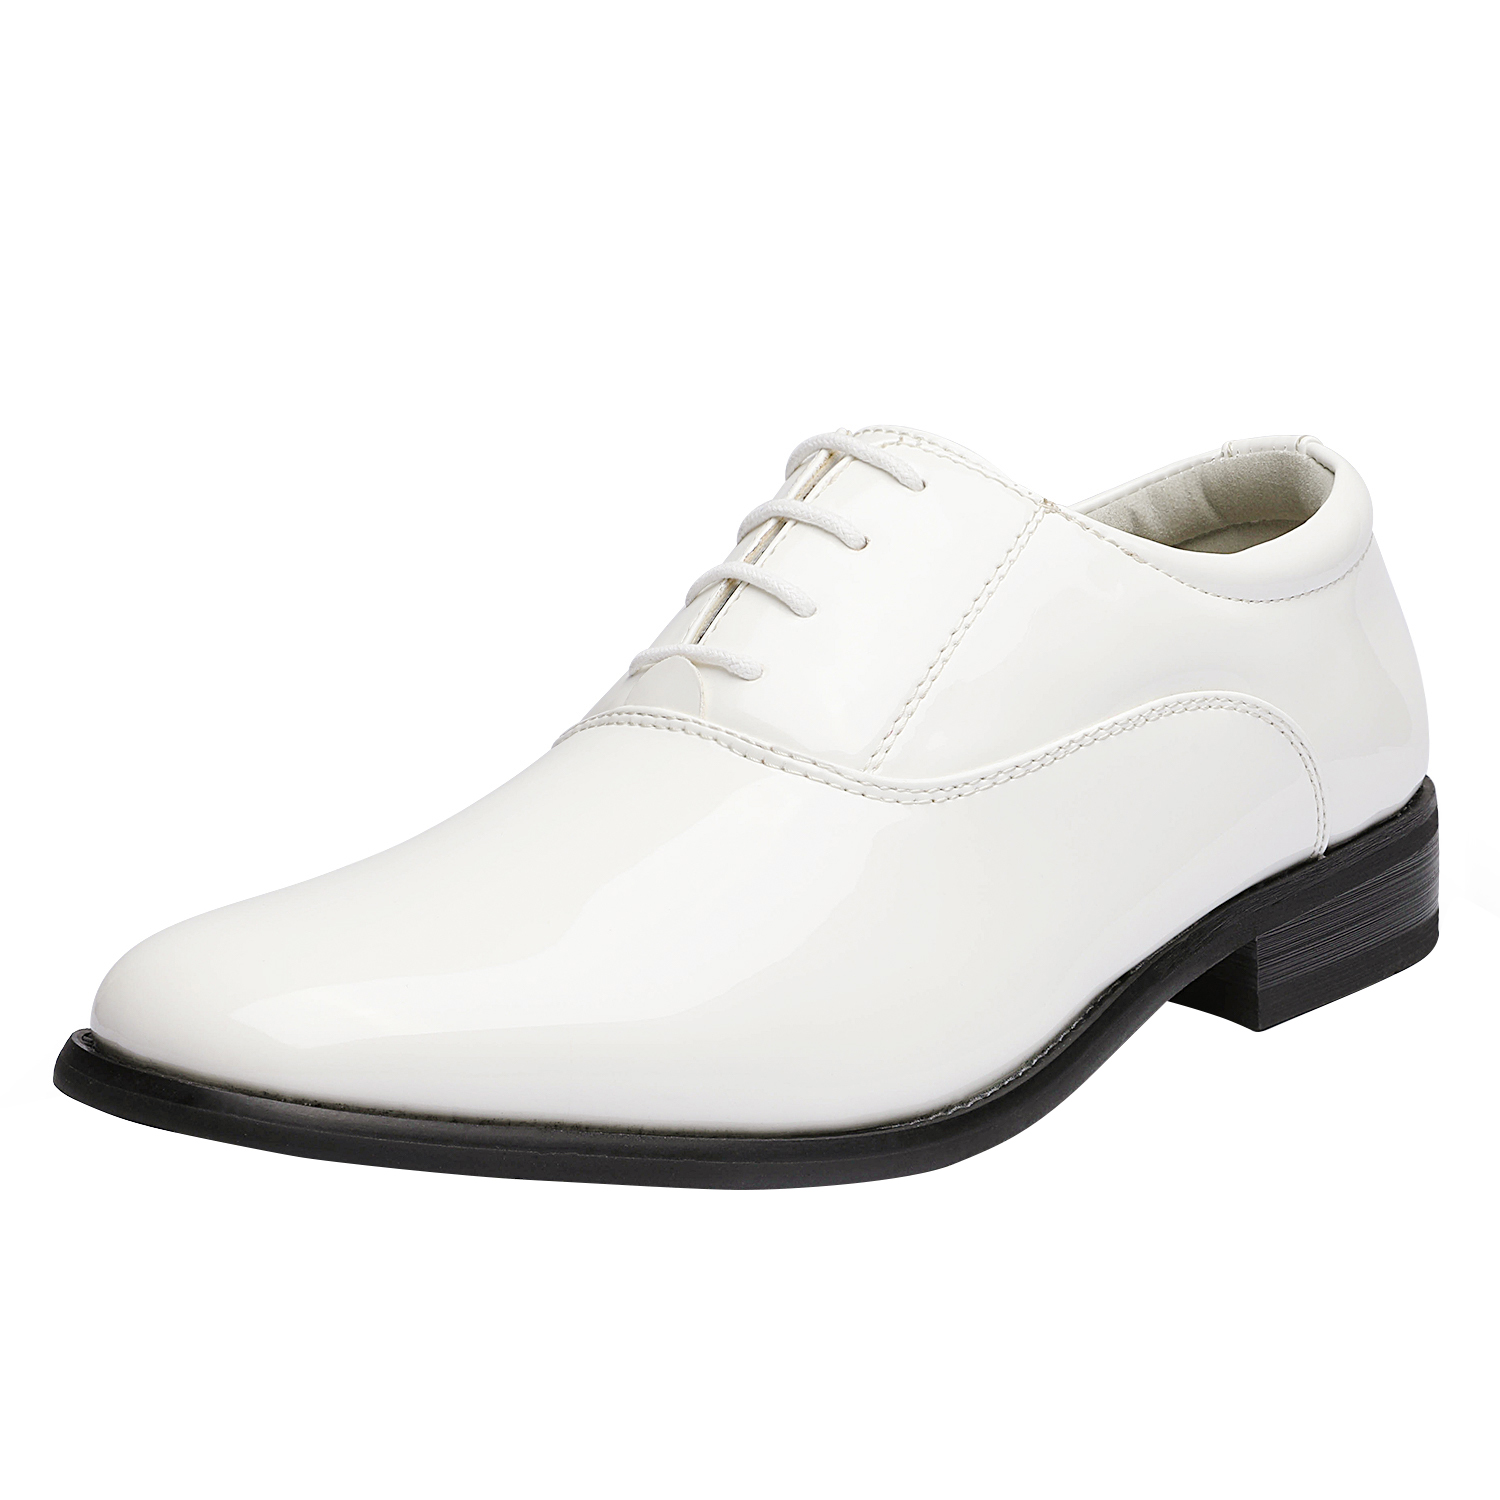 Bruno Marc Men's Faux Patent Leather Dress Shoes Classic Lace-up Formal Oxford WHITE CEREMONY-05 - image 1 of 5